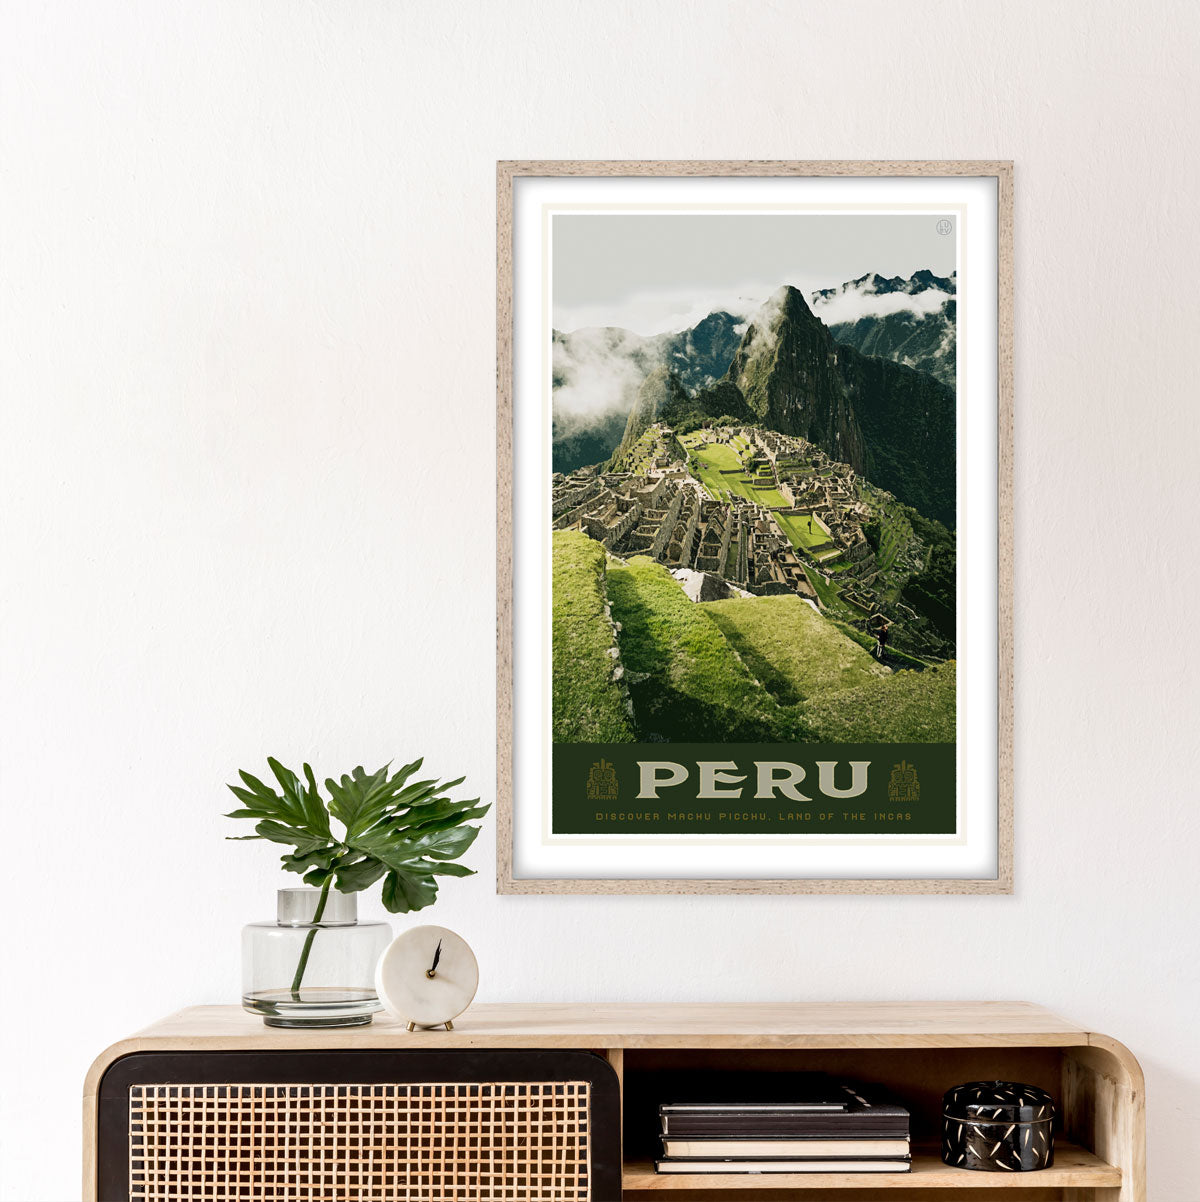 Peru vintage style travel poster by places we luv